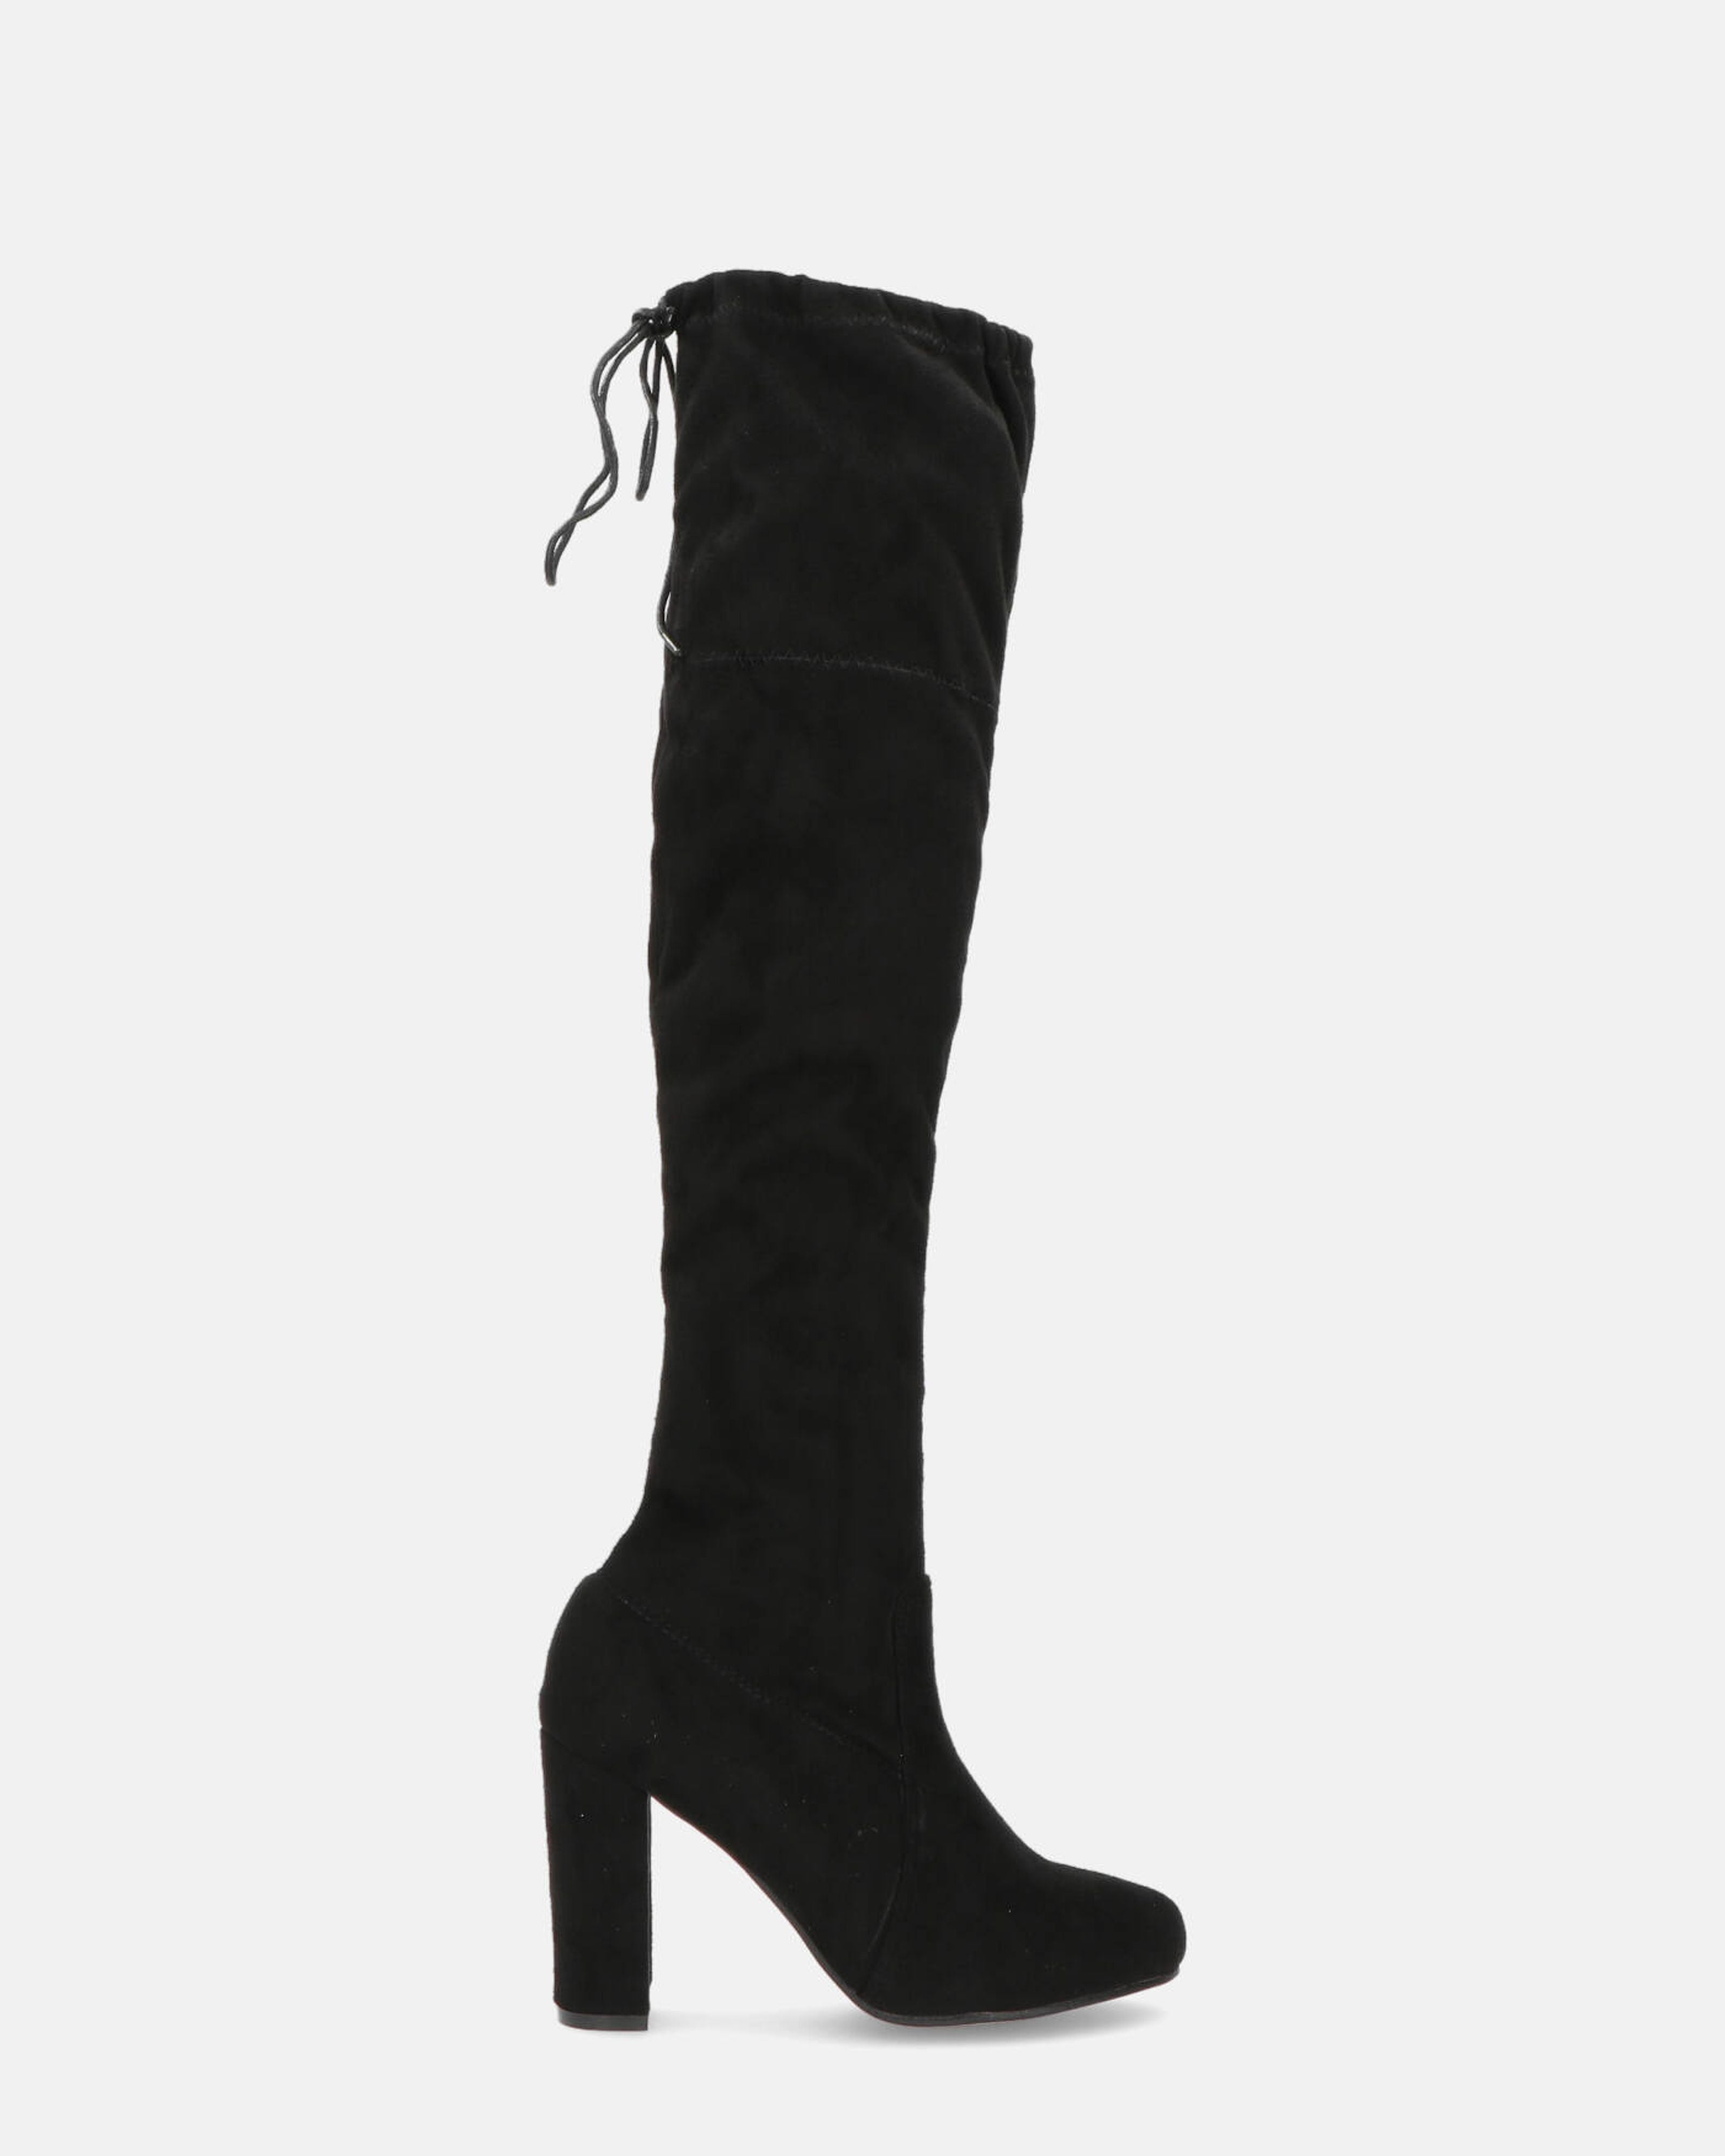 BETTY - heeled over the knee boots